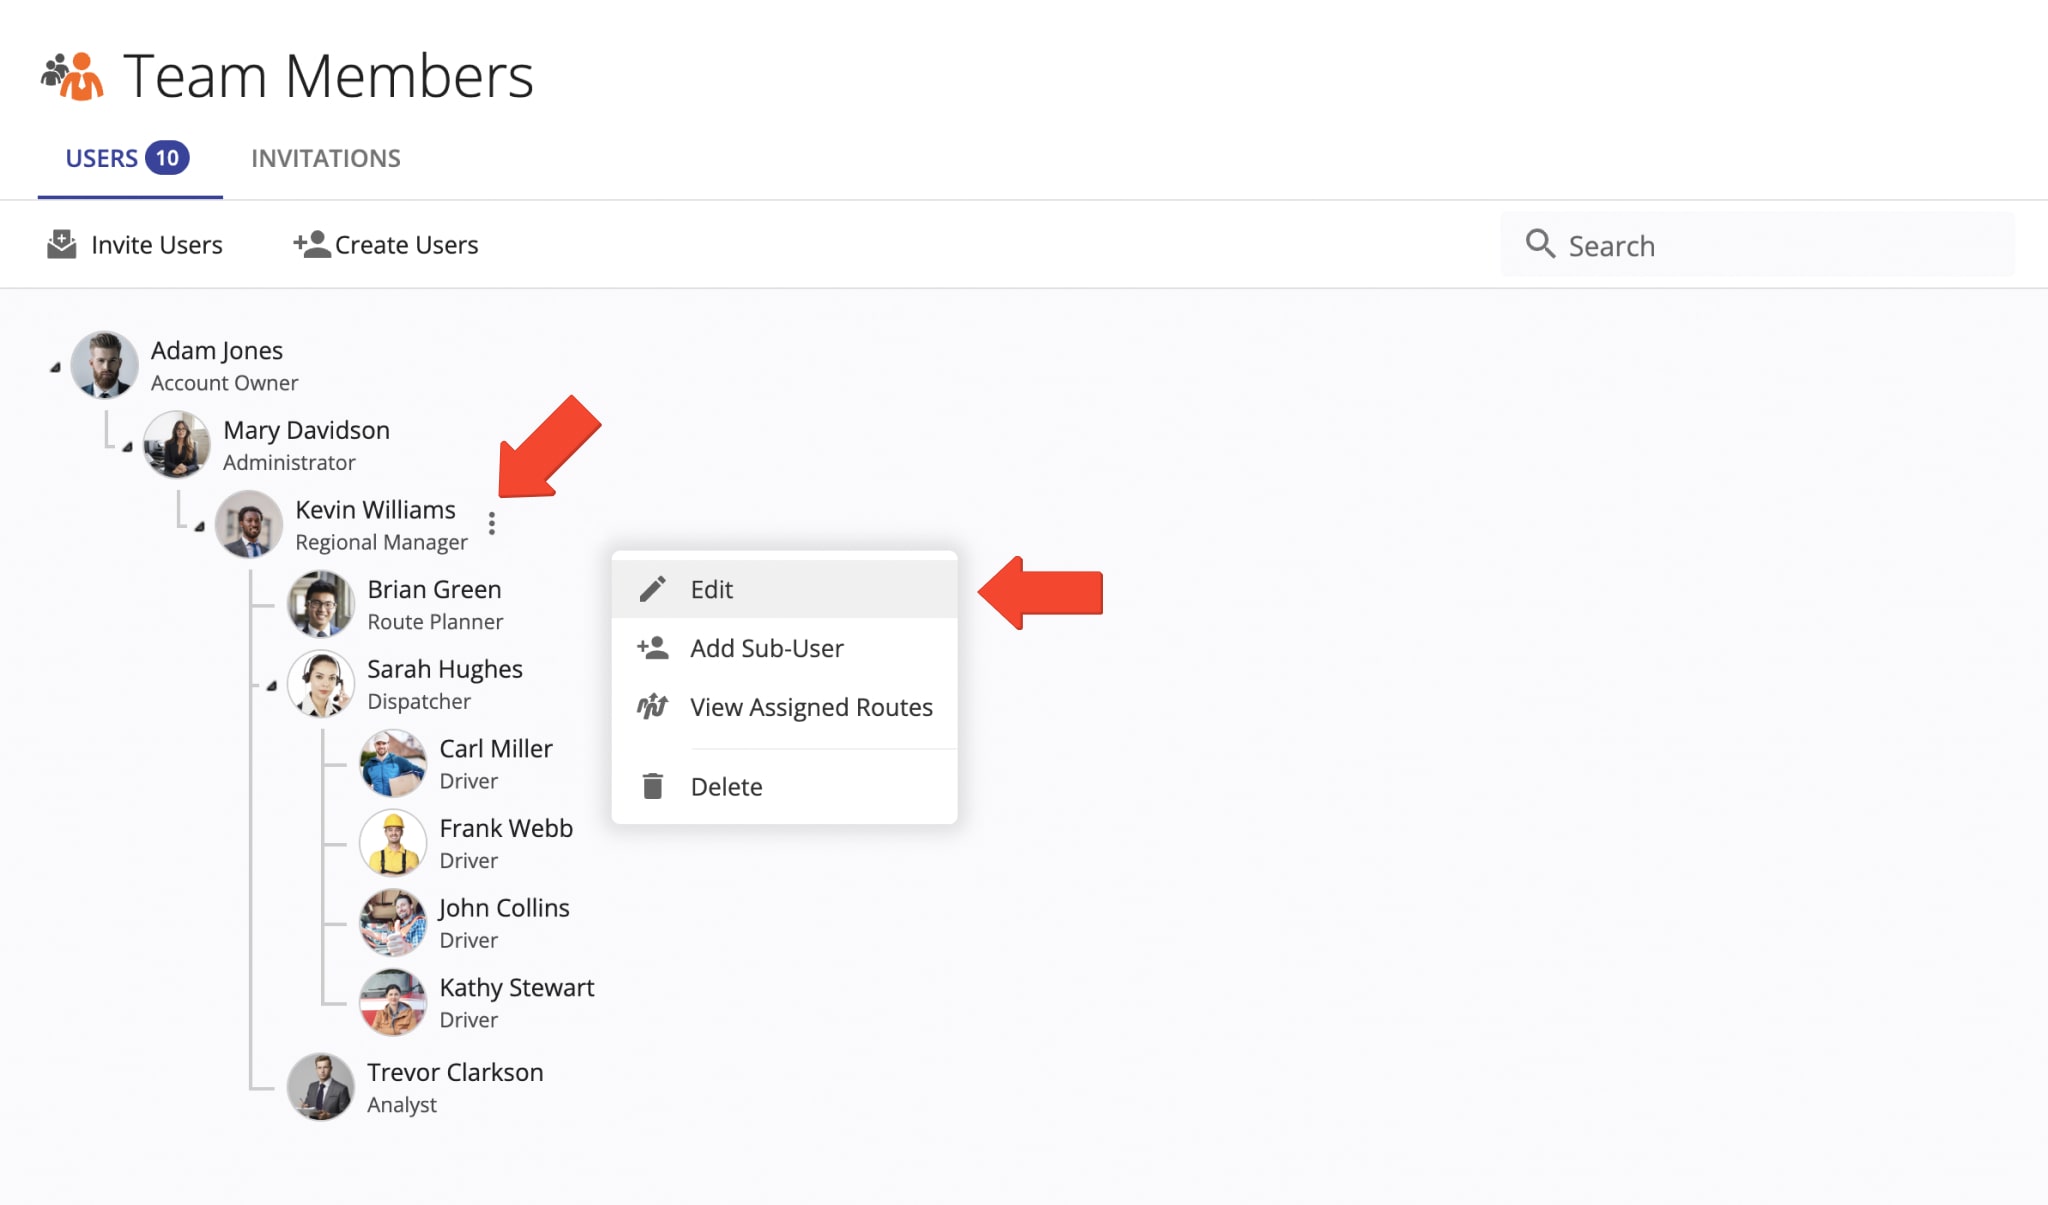 Edit account level permissions for drivers, route planners, dispatchers, and other team members.